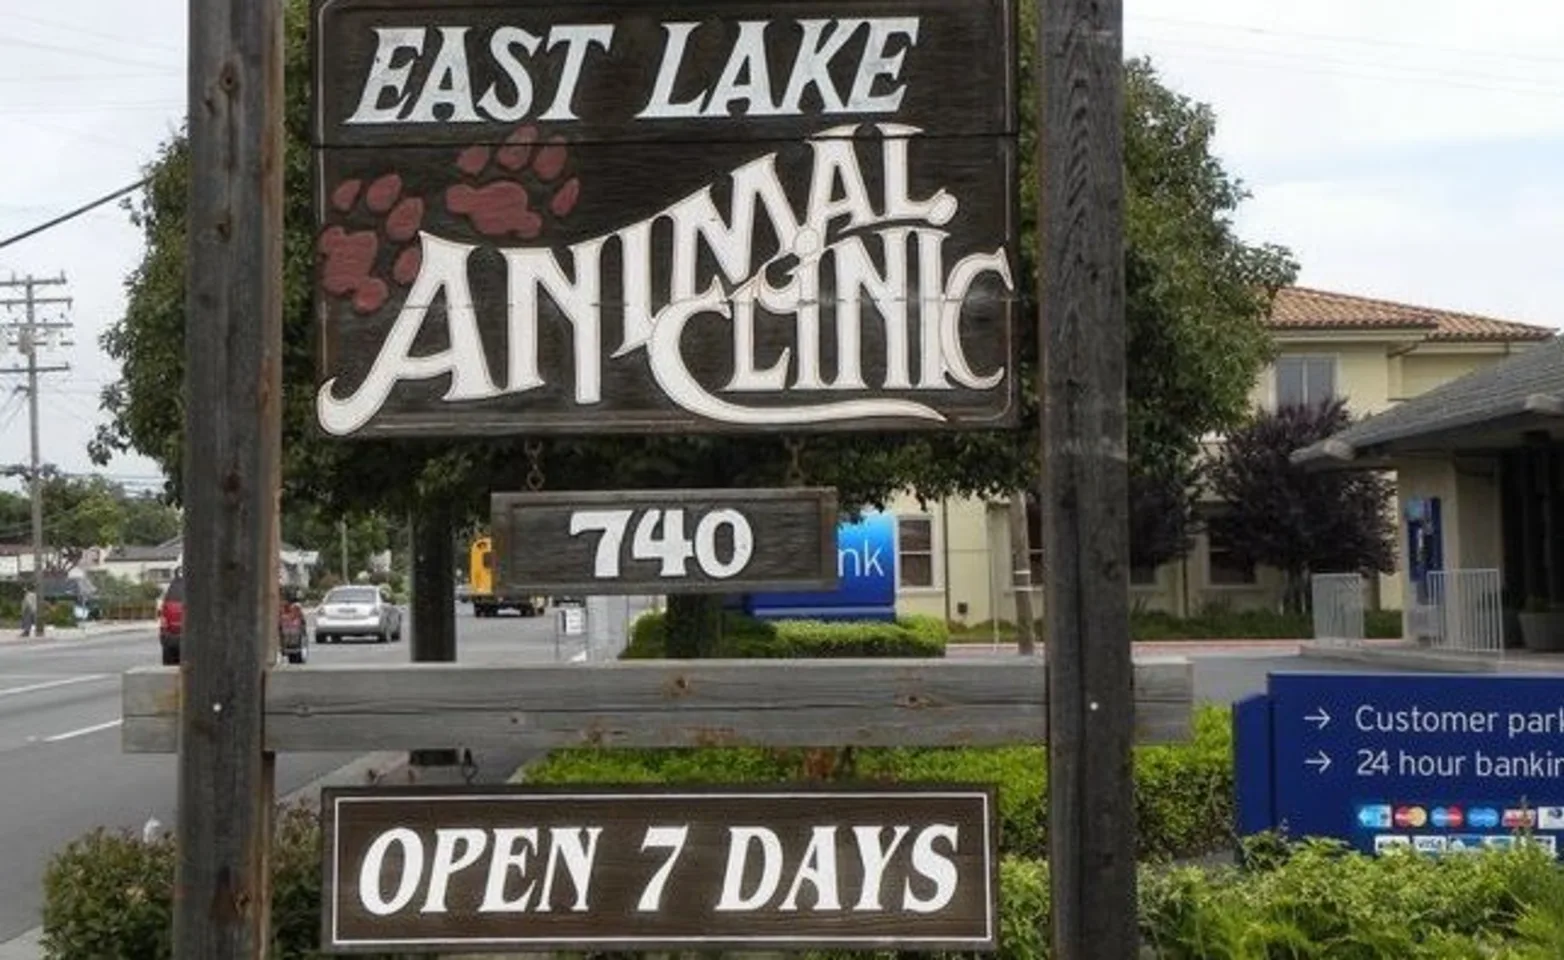 East Lake Animal Clinic's front signage of their address and name